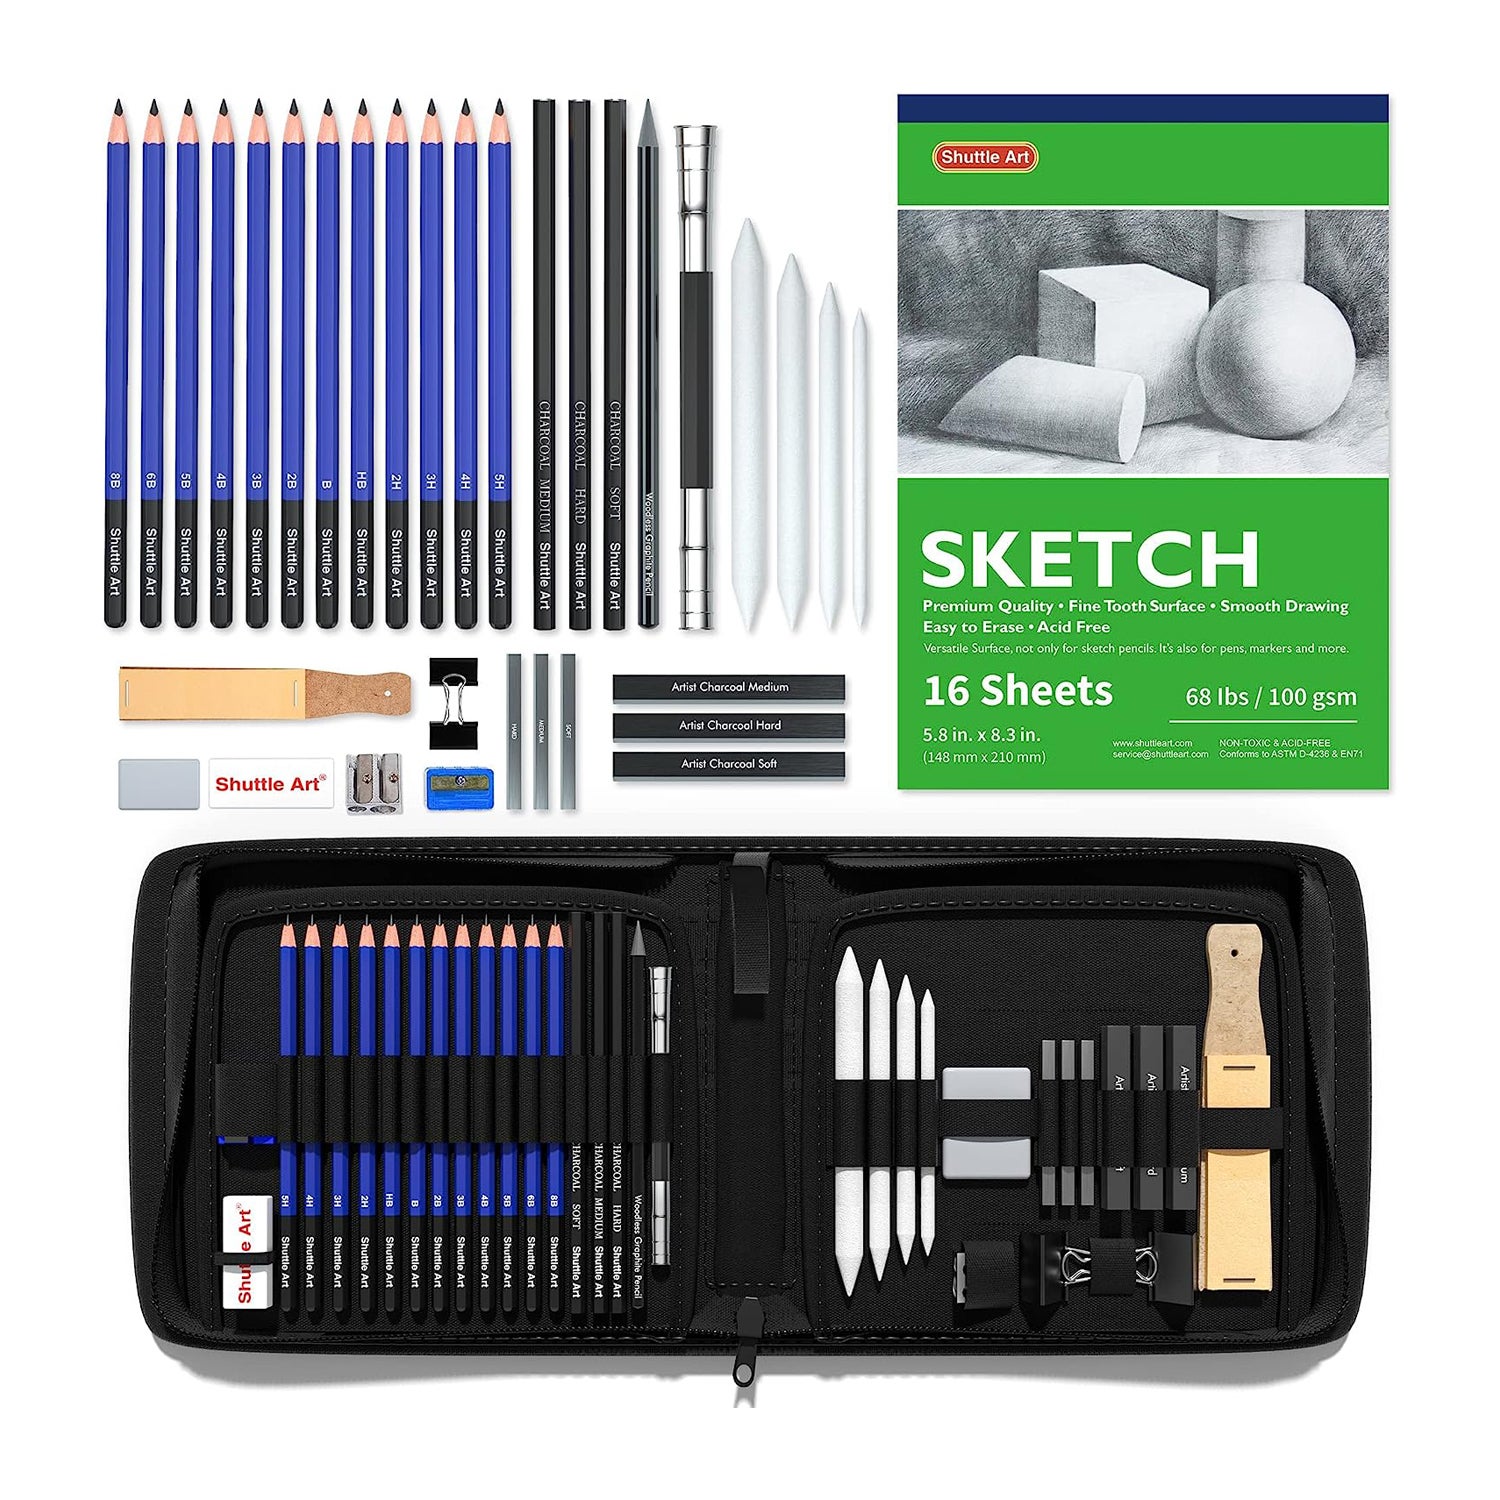 Shuttle Art Drawing Kit, 103 Pack Drawing Pencils Set, Sketching and Drawing  Art Set with Colored Pencils, Sketch and Graphite Pencils in Portable Case,  Drawing Supplies for Kids, Adults and Artists